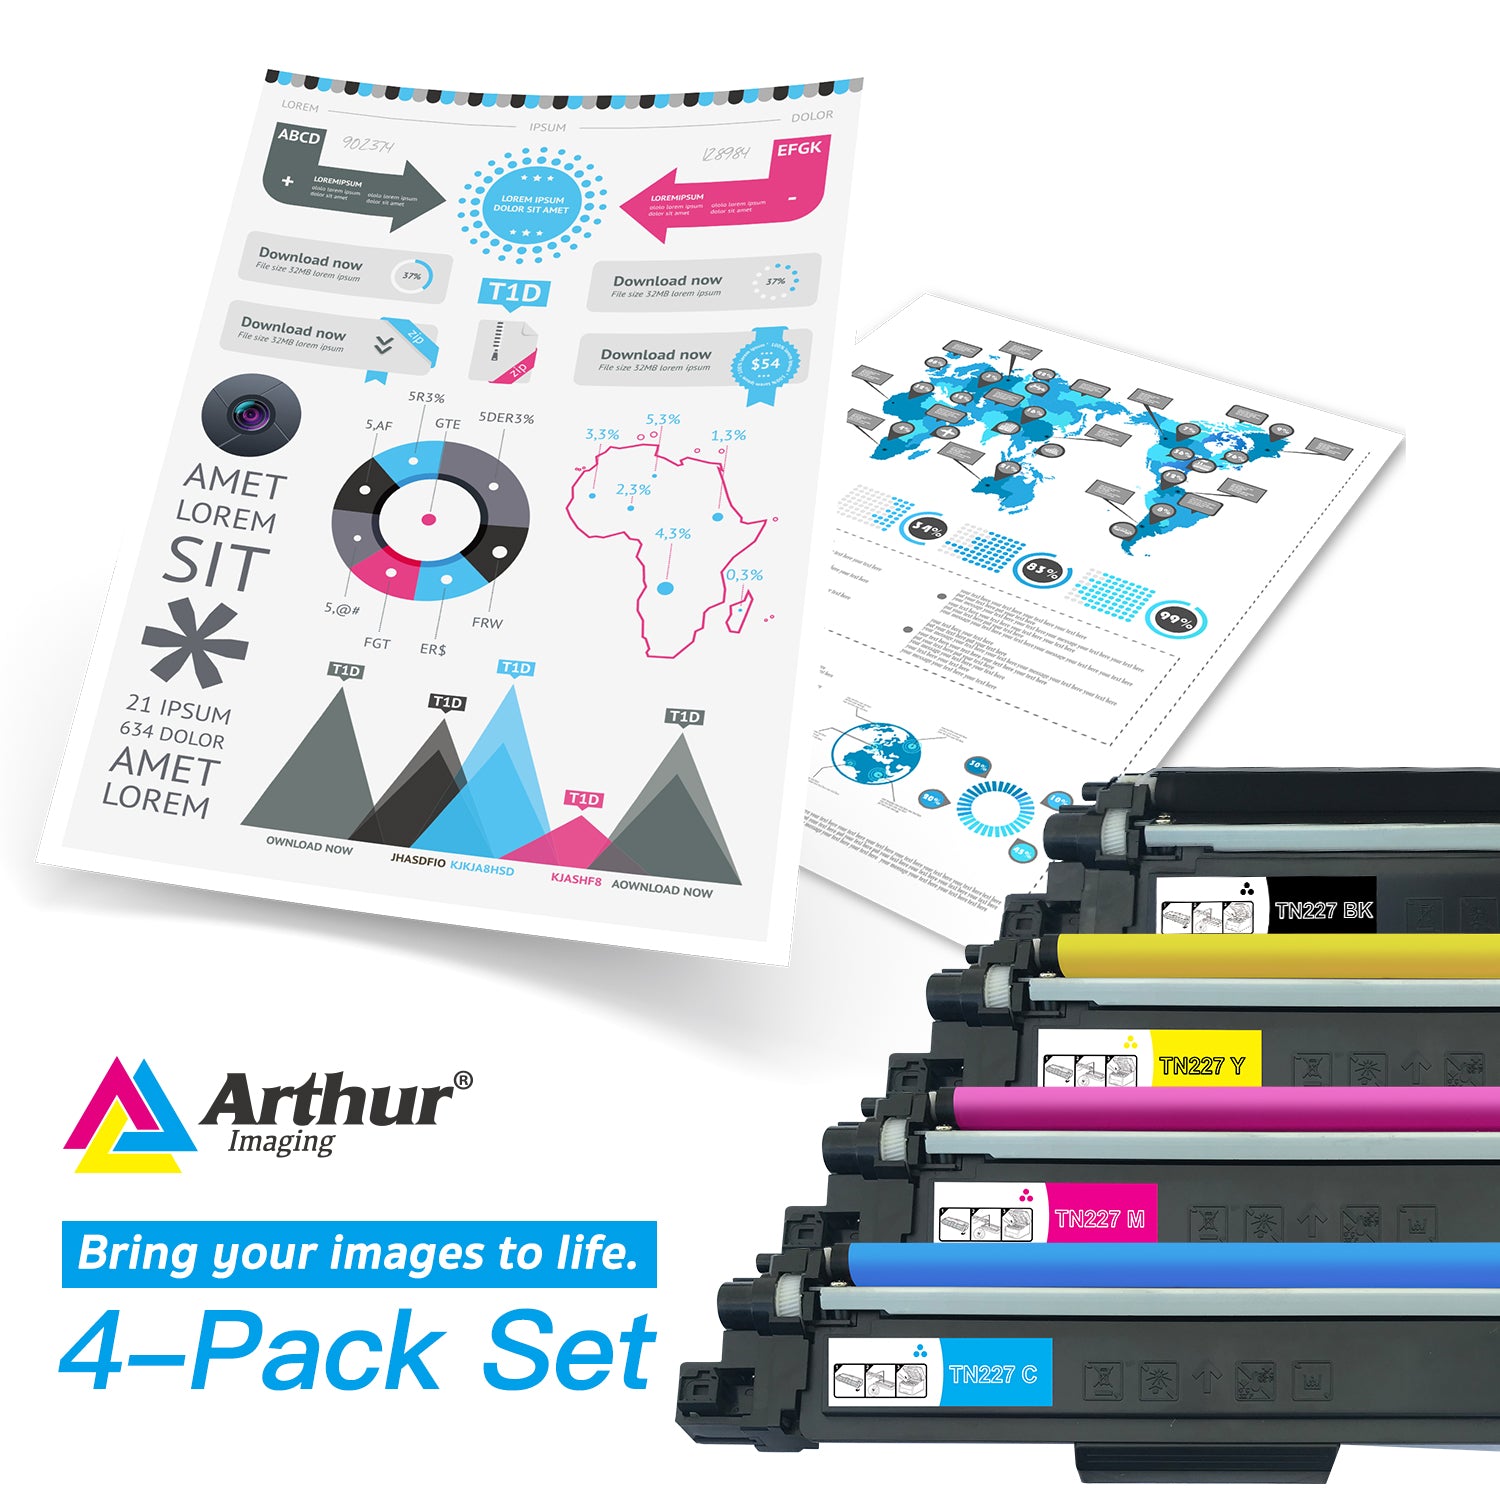 Arthur Imaging Compatible Toner Cartridges Replacement for Brother TN227 (Black, Cyan, Yellow, Magenta, 4-pack)